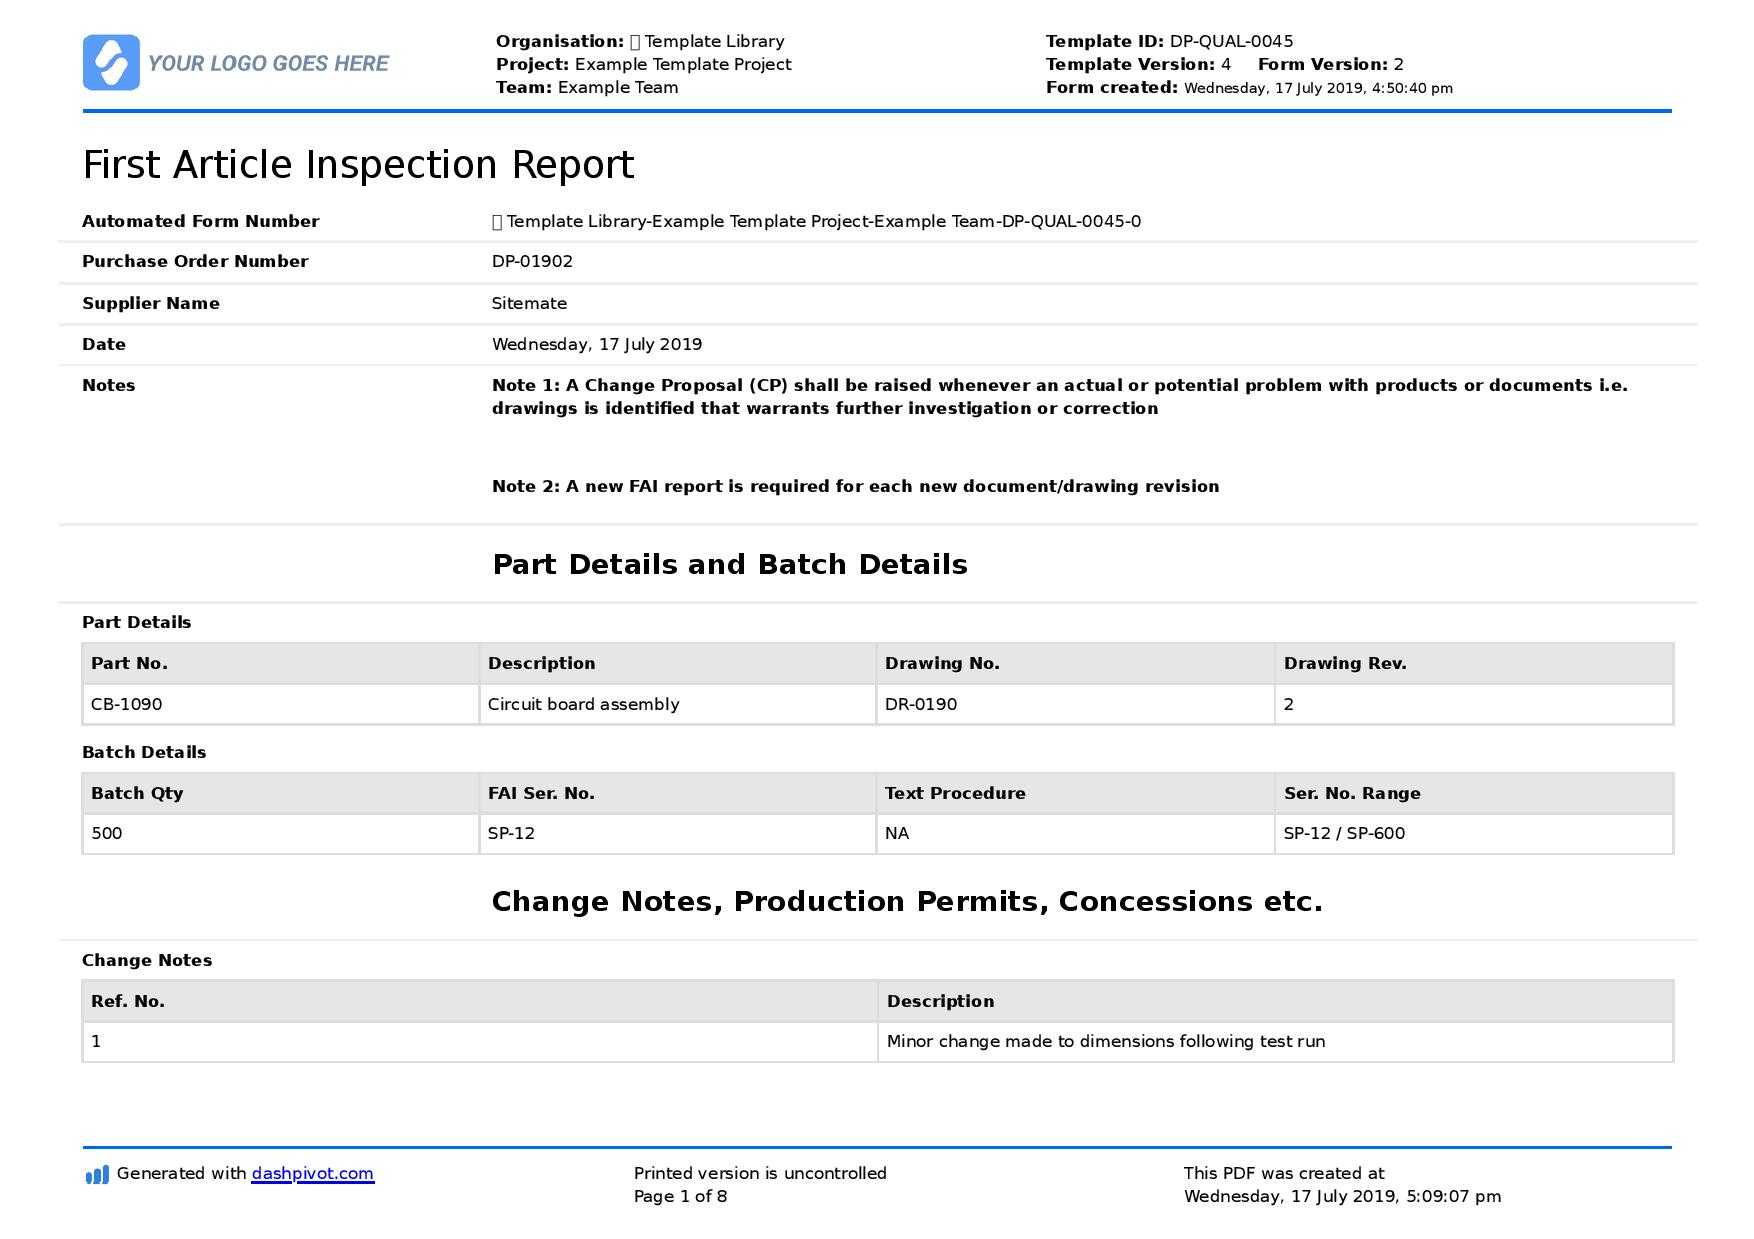 First Article Inspection Form Template: Free & Editable Within Engineering Inspection Report Template